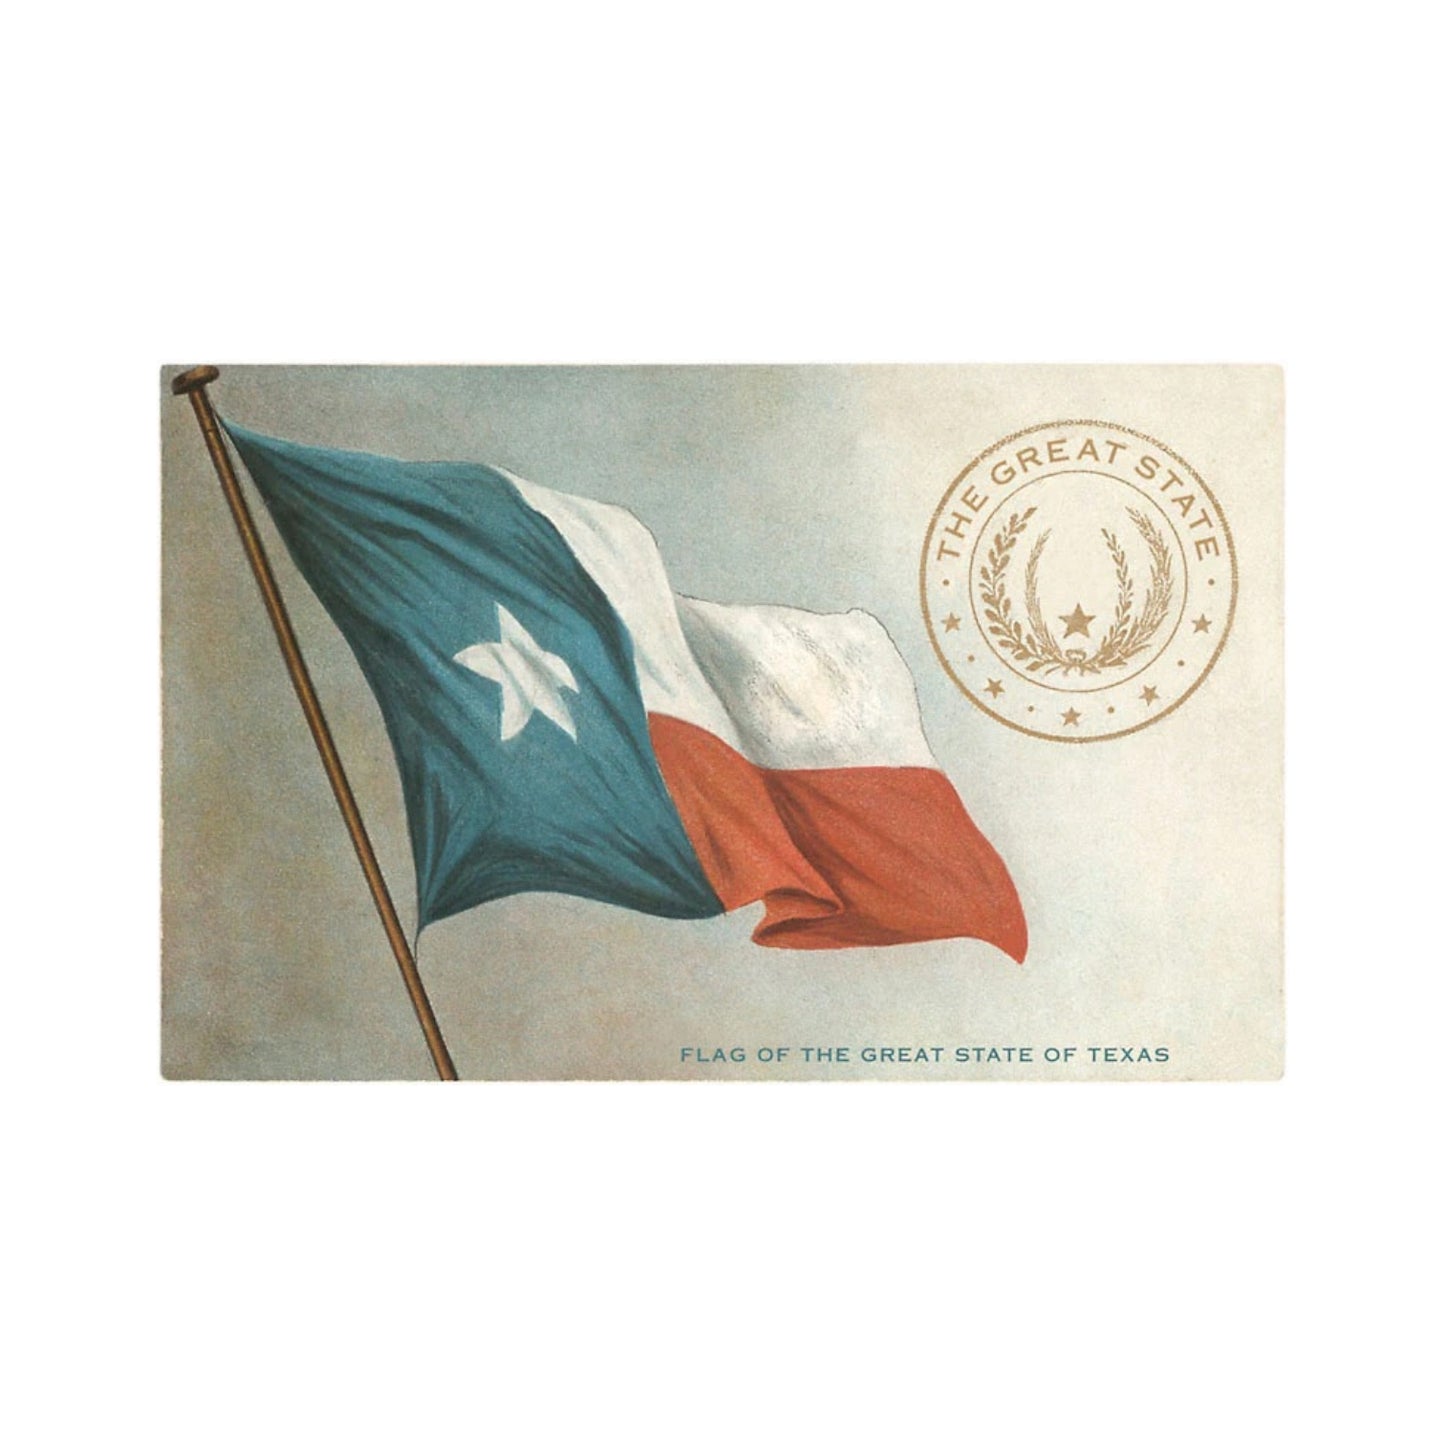 Texas State Flag Magnet by Found Image Press